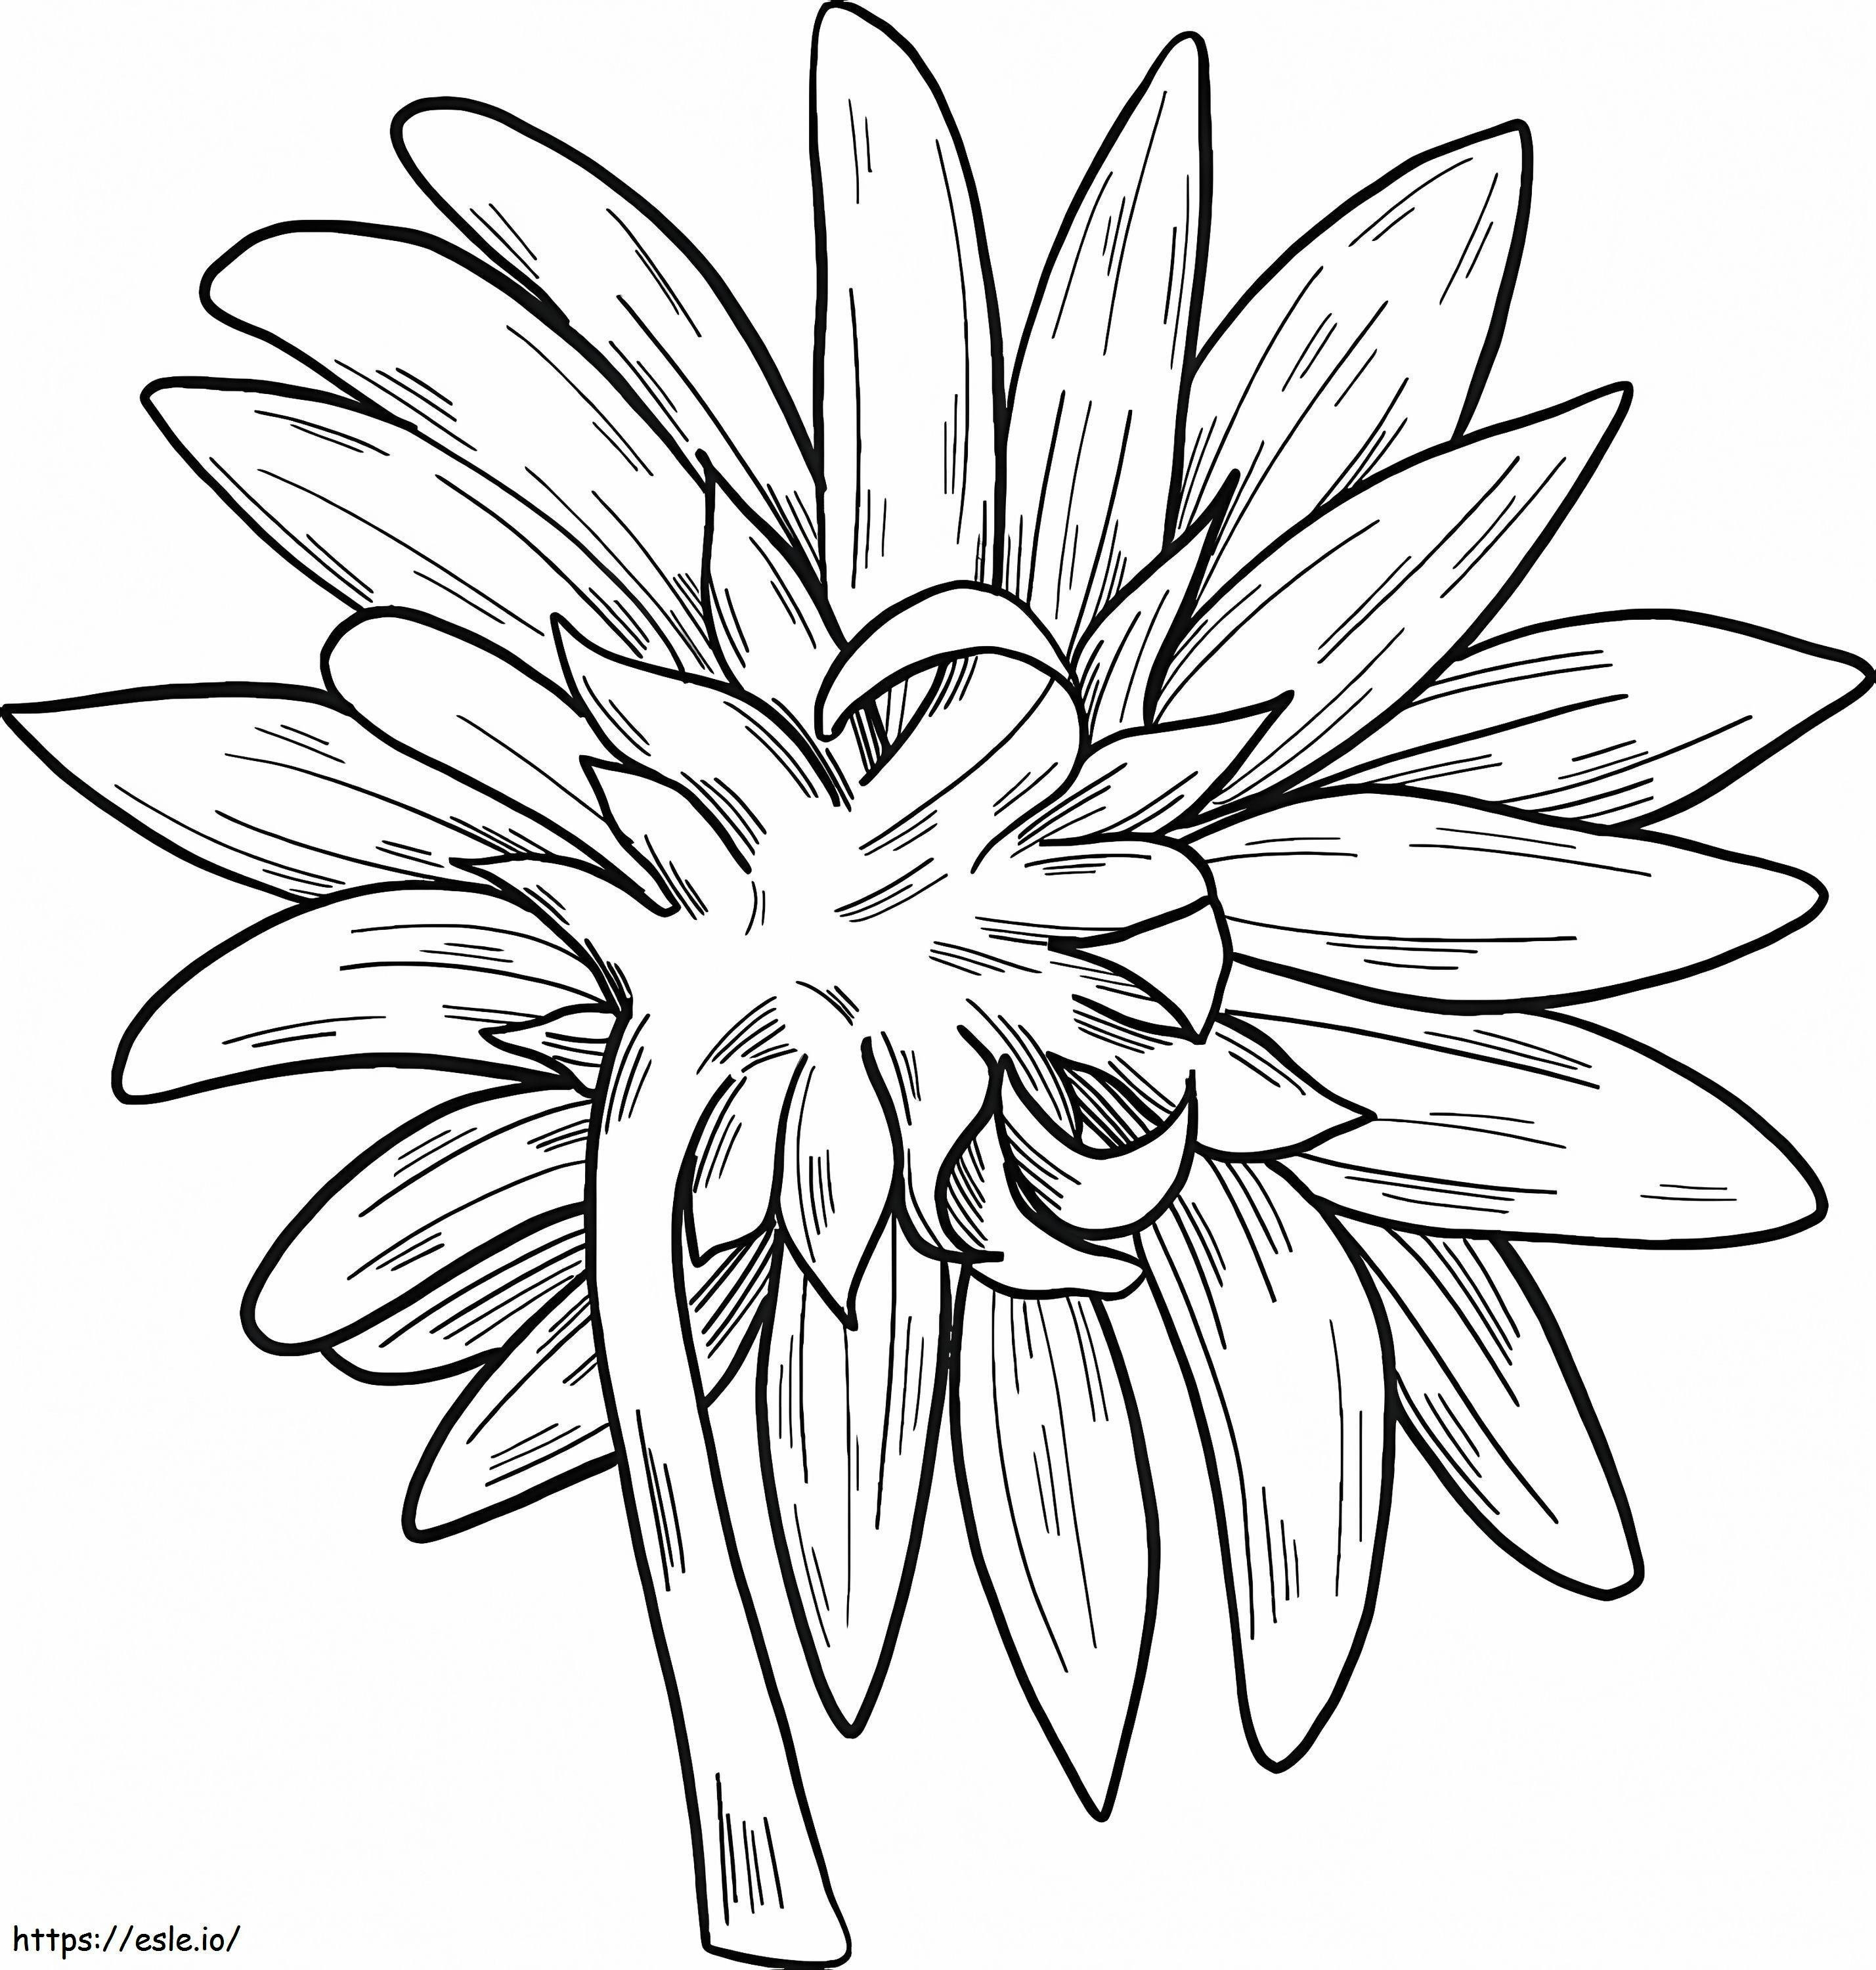 Free Sunflower Printable coloring page